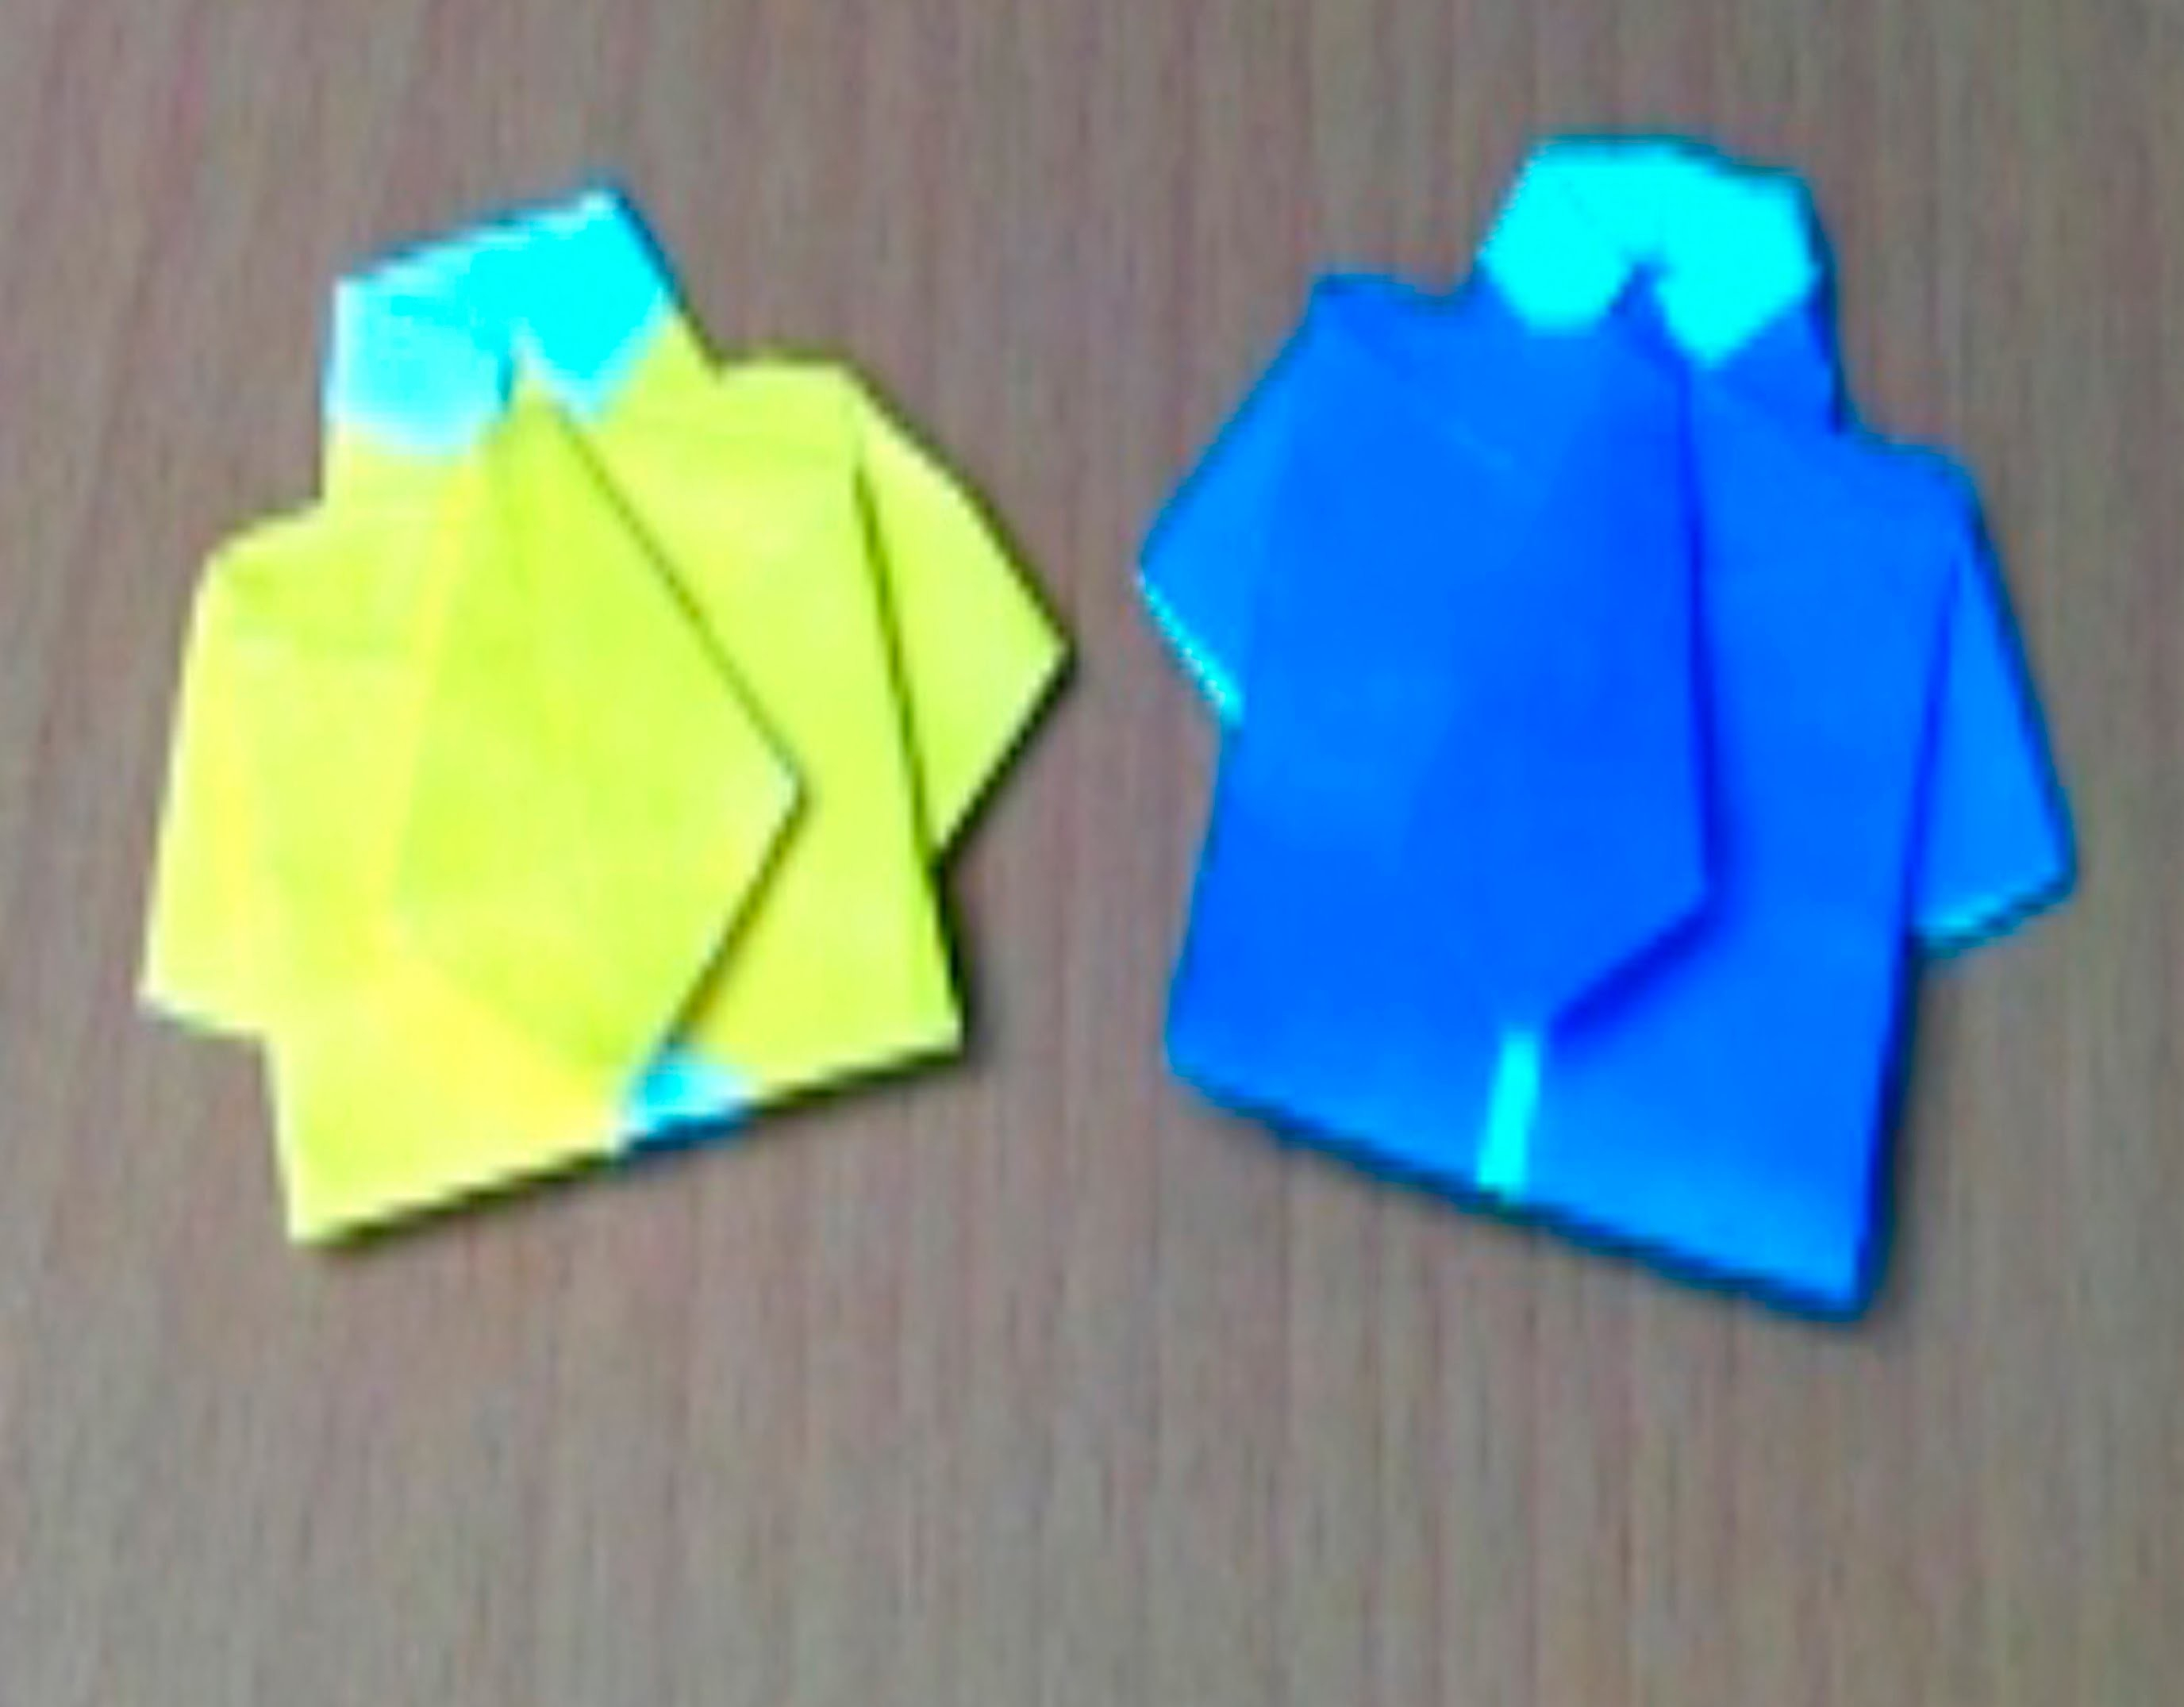 Origami T Shirt With Tie Origami Tshirt And Tie Ll Ll Origami Baju